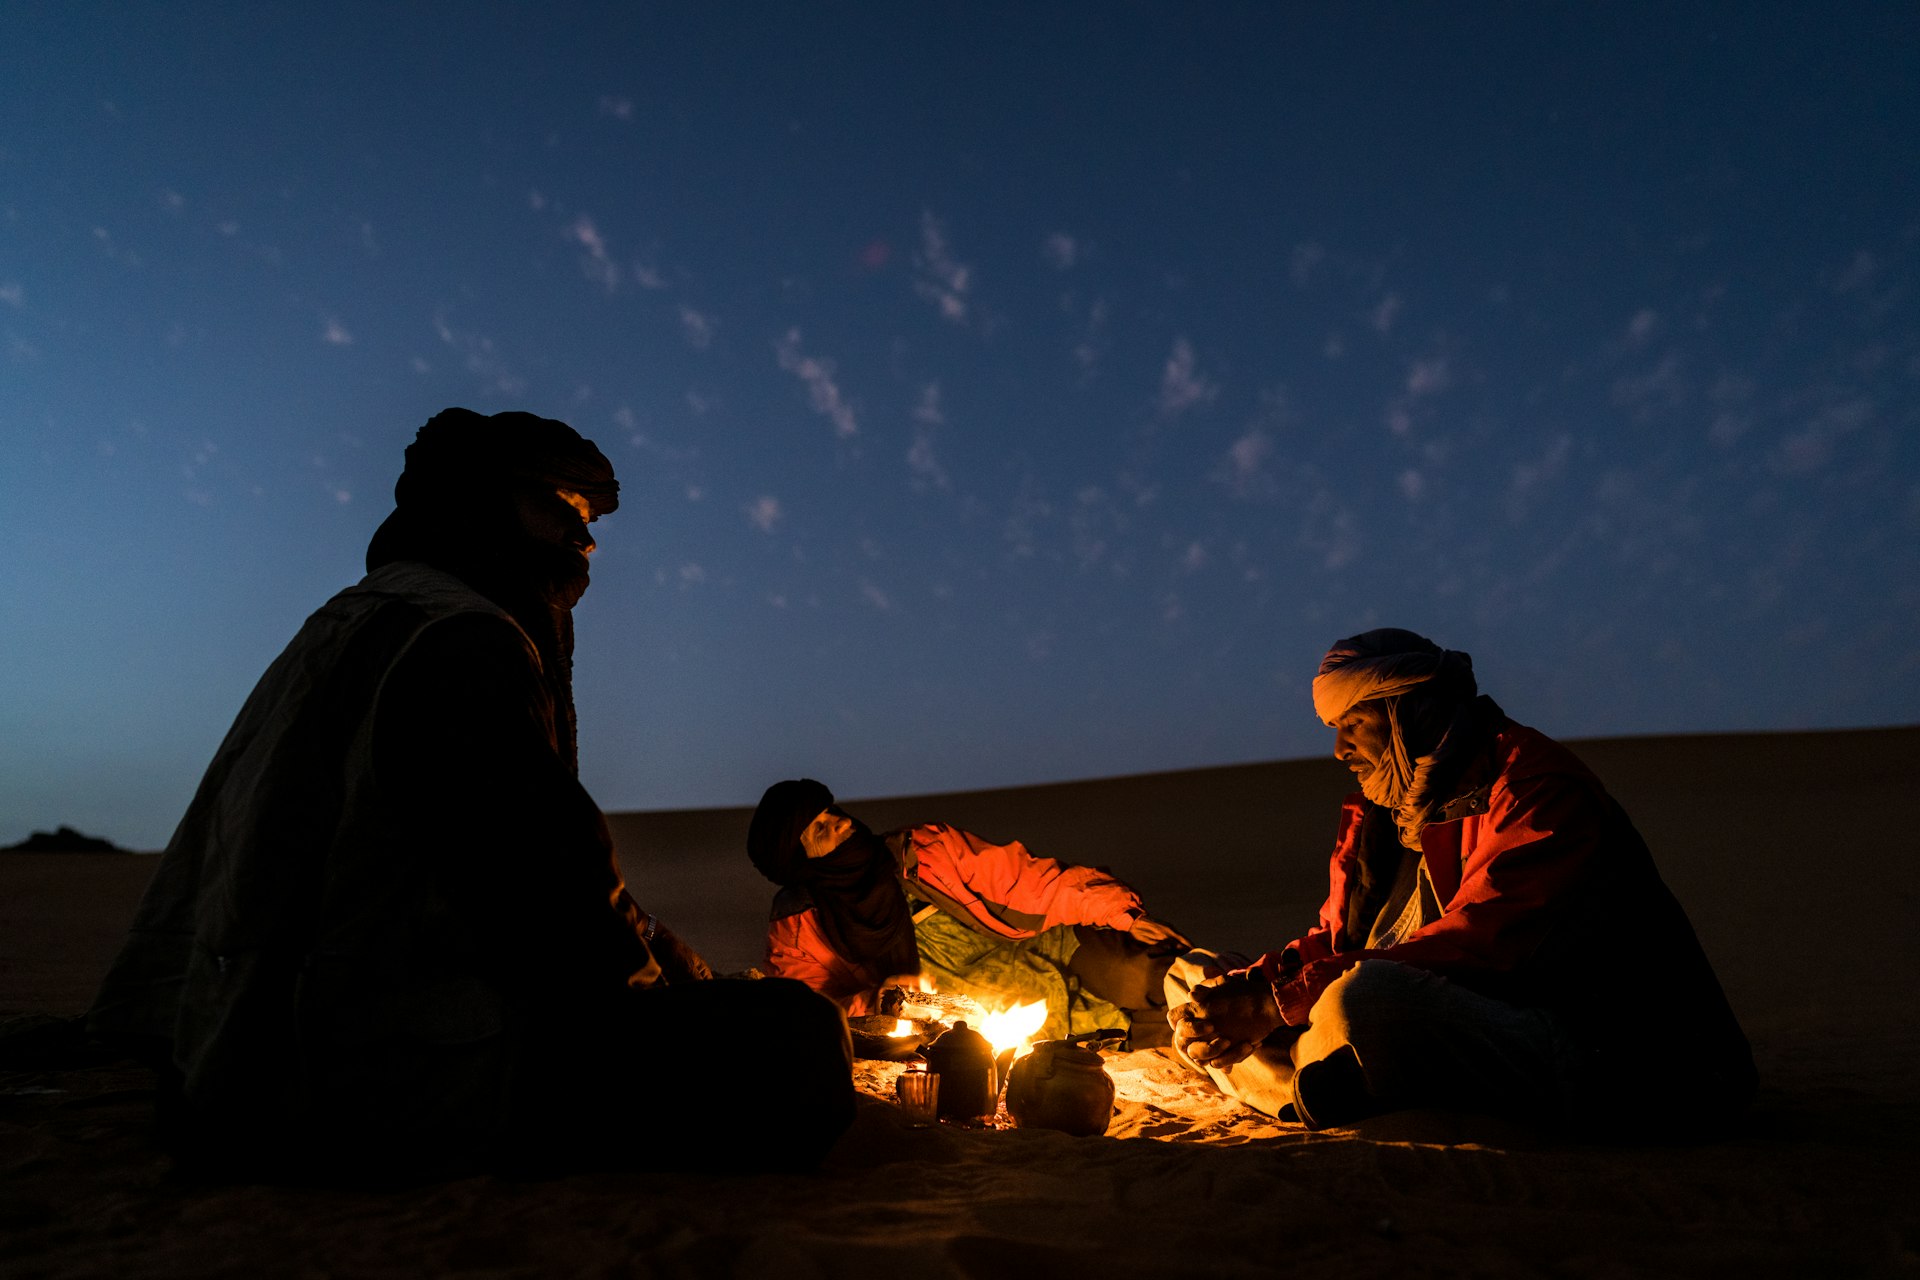 Guides talking over a fire and night sky in Tassili National Park